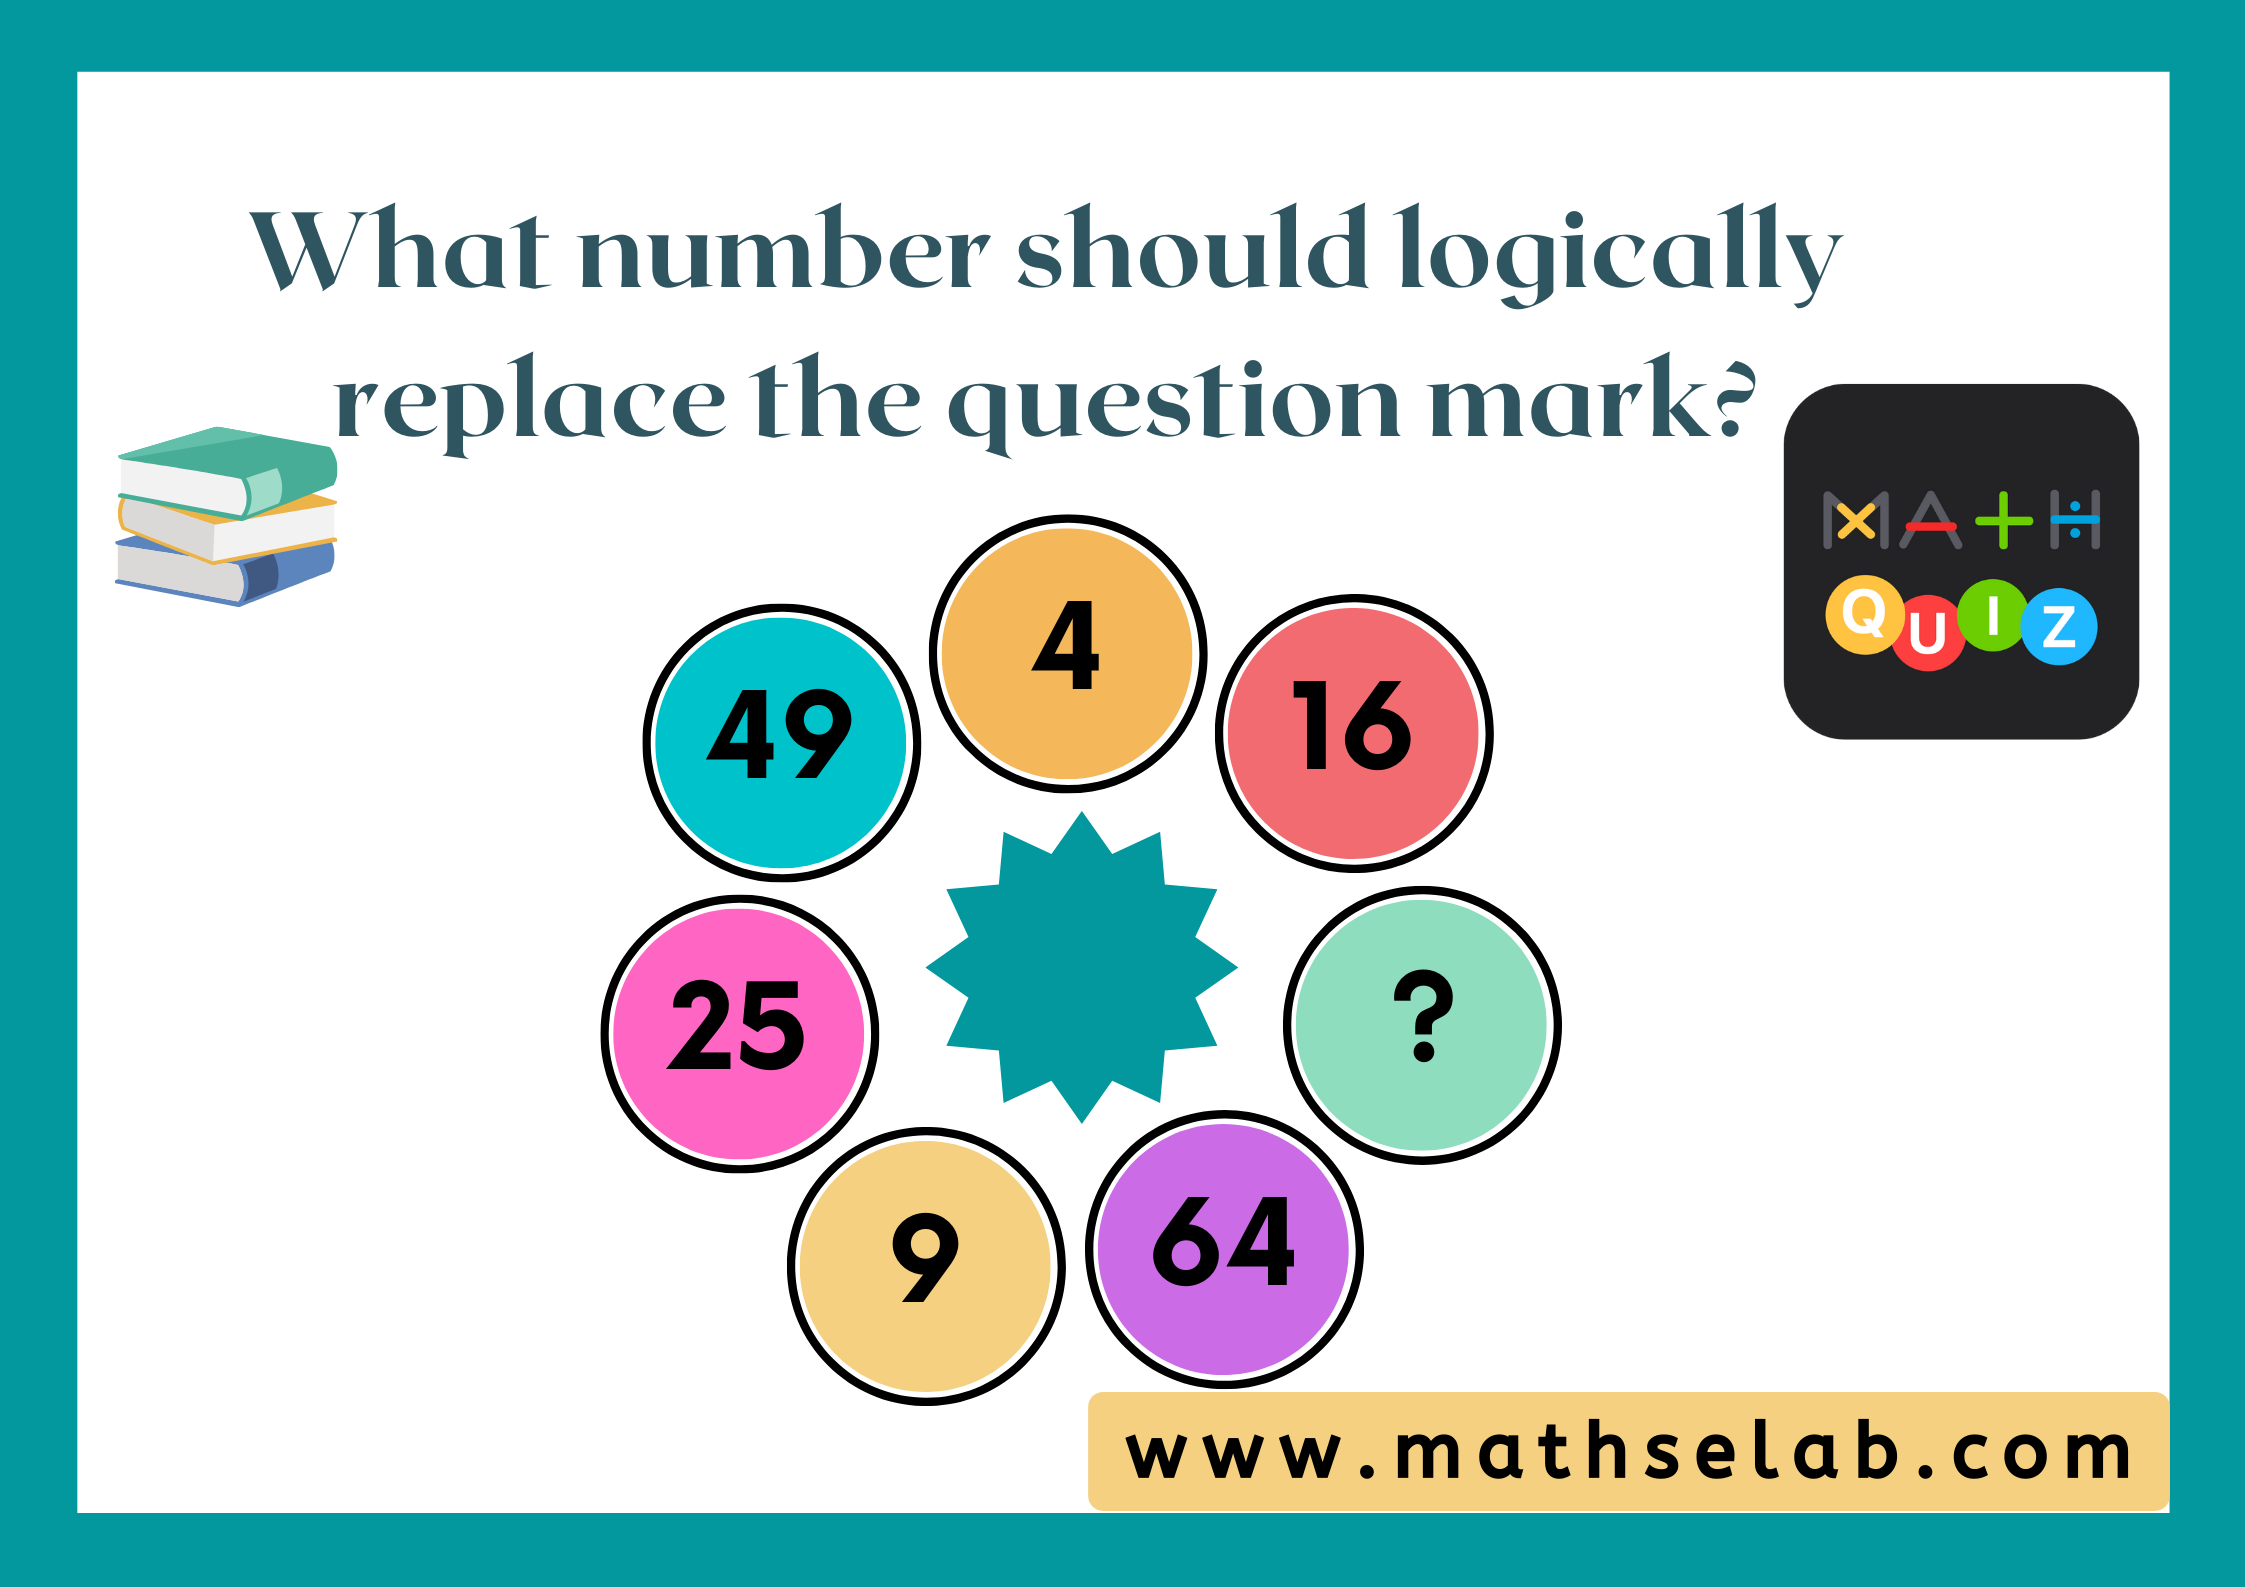 What number should logically replace the question mark?